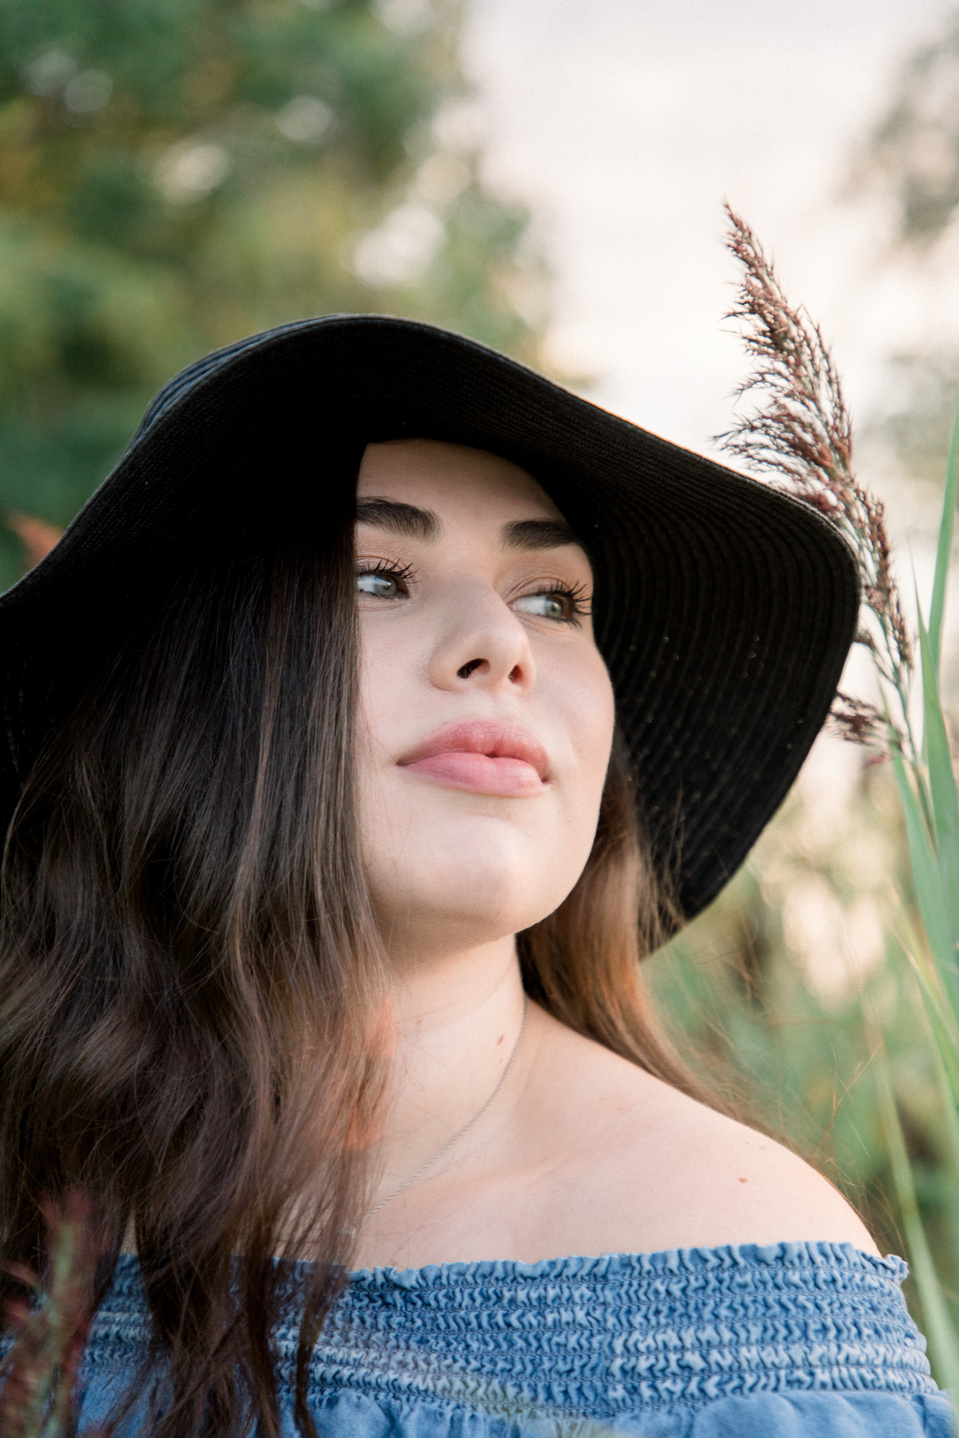 Close-up portrait of woman wearing hat looking off into the distance. Niagara portrait photography, Niagara portrait photographer, Niagara branding photography, Niagara branding photographer.